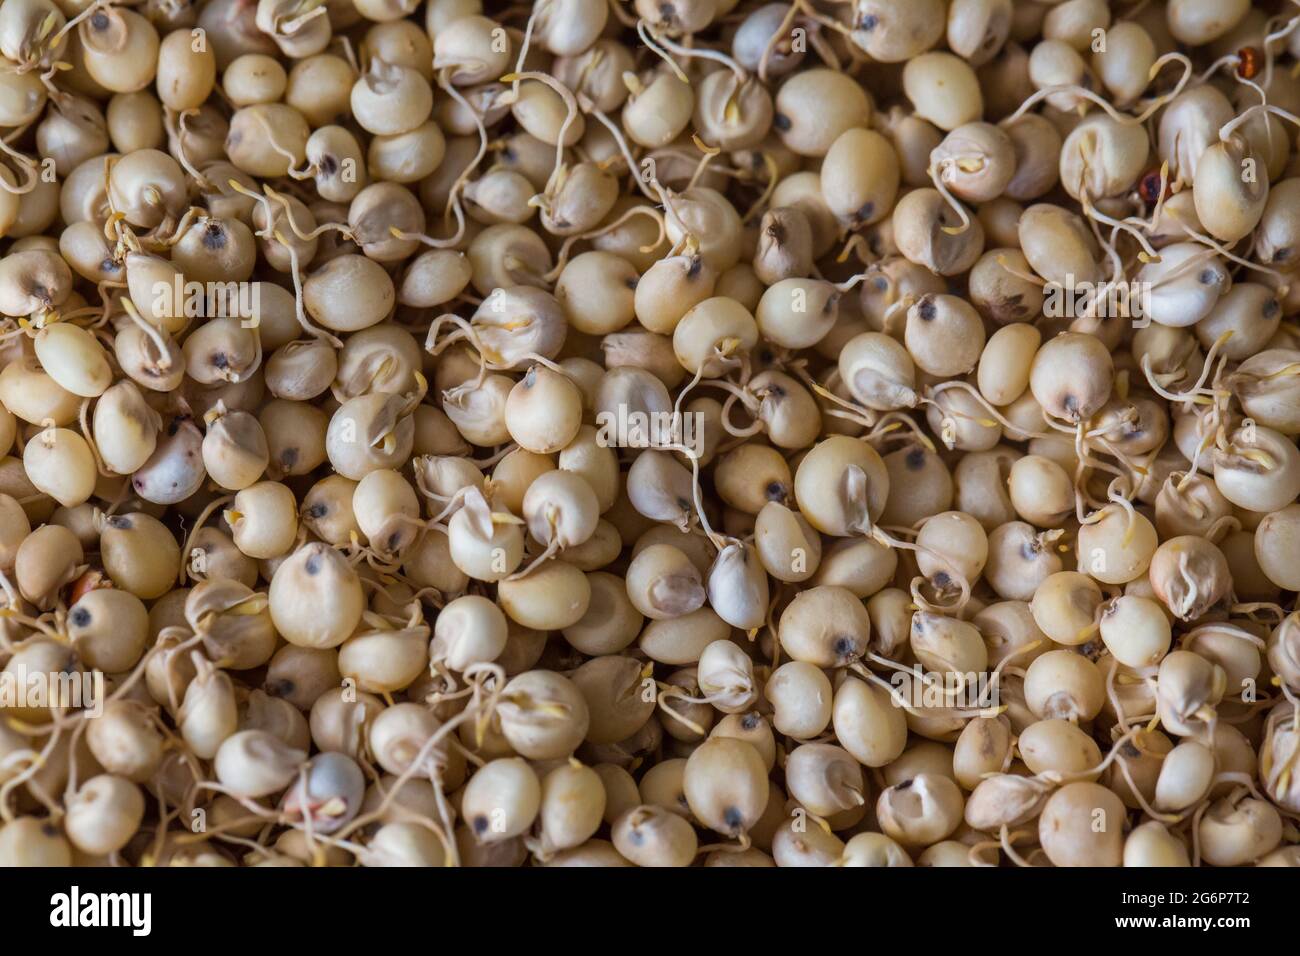 Close up of Sprouted Sorghum (Jowar) or  Egyptian millet Seeds . Sorghum is an ancient cereal grain belonging to the grass family Poaceae. Stock Photo